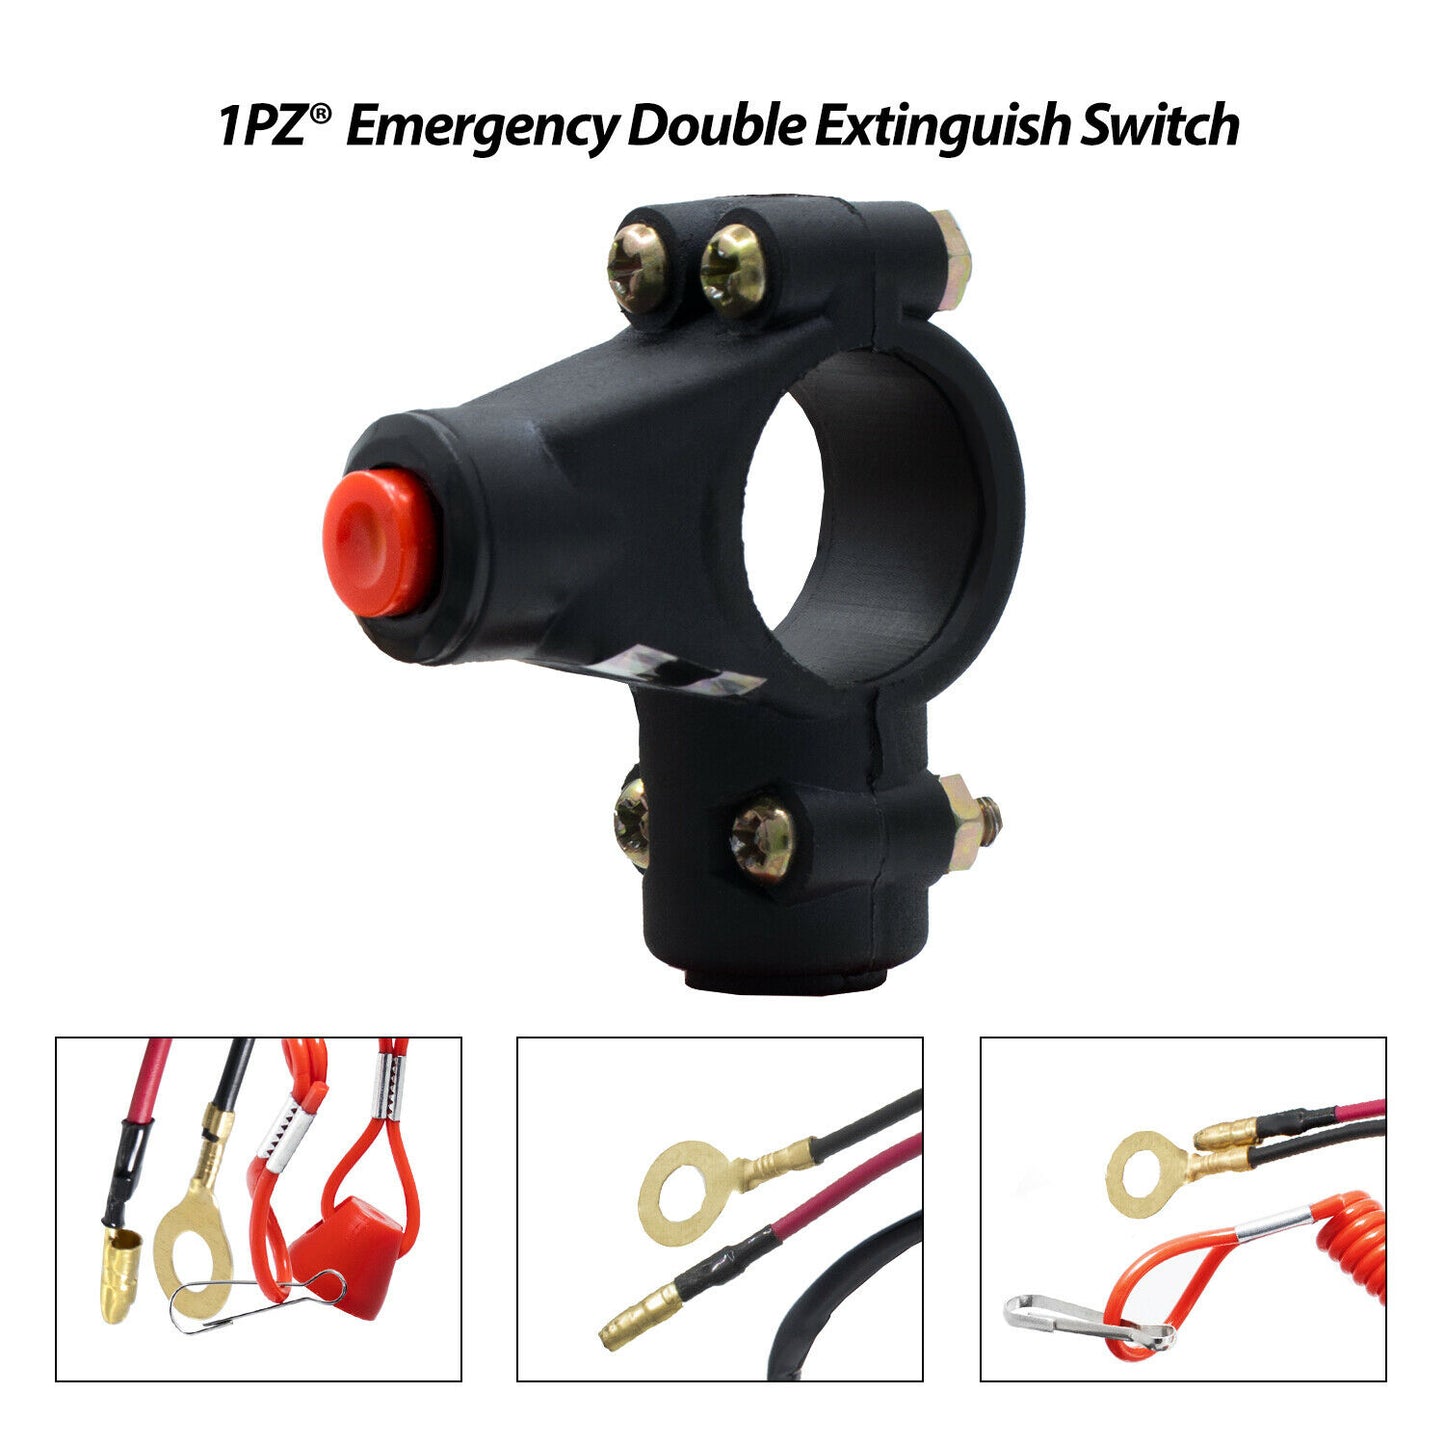 1PZ BR2-L02 Dirt Bike Handlebar Mount Safety Tether Engine Kill Stop Switch Push Button 12V 2 Wires for Yamaha Honda Tohatsu Boat Outboard Motorcycle ATV Dirt Bike